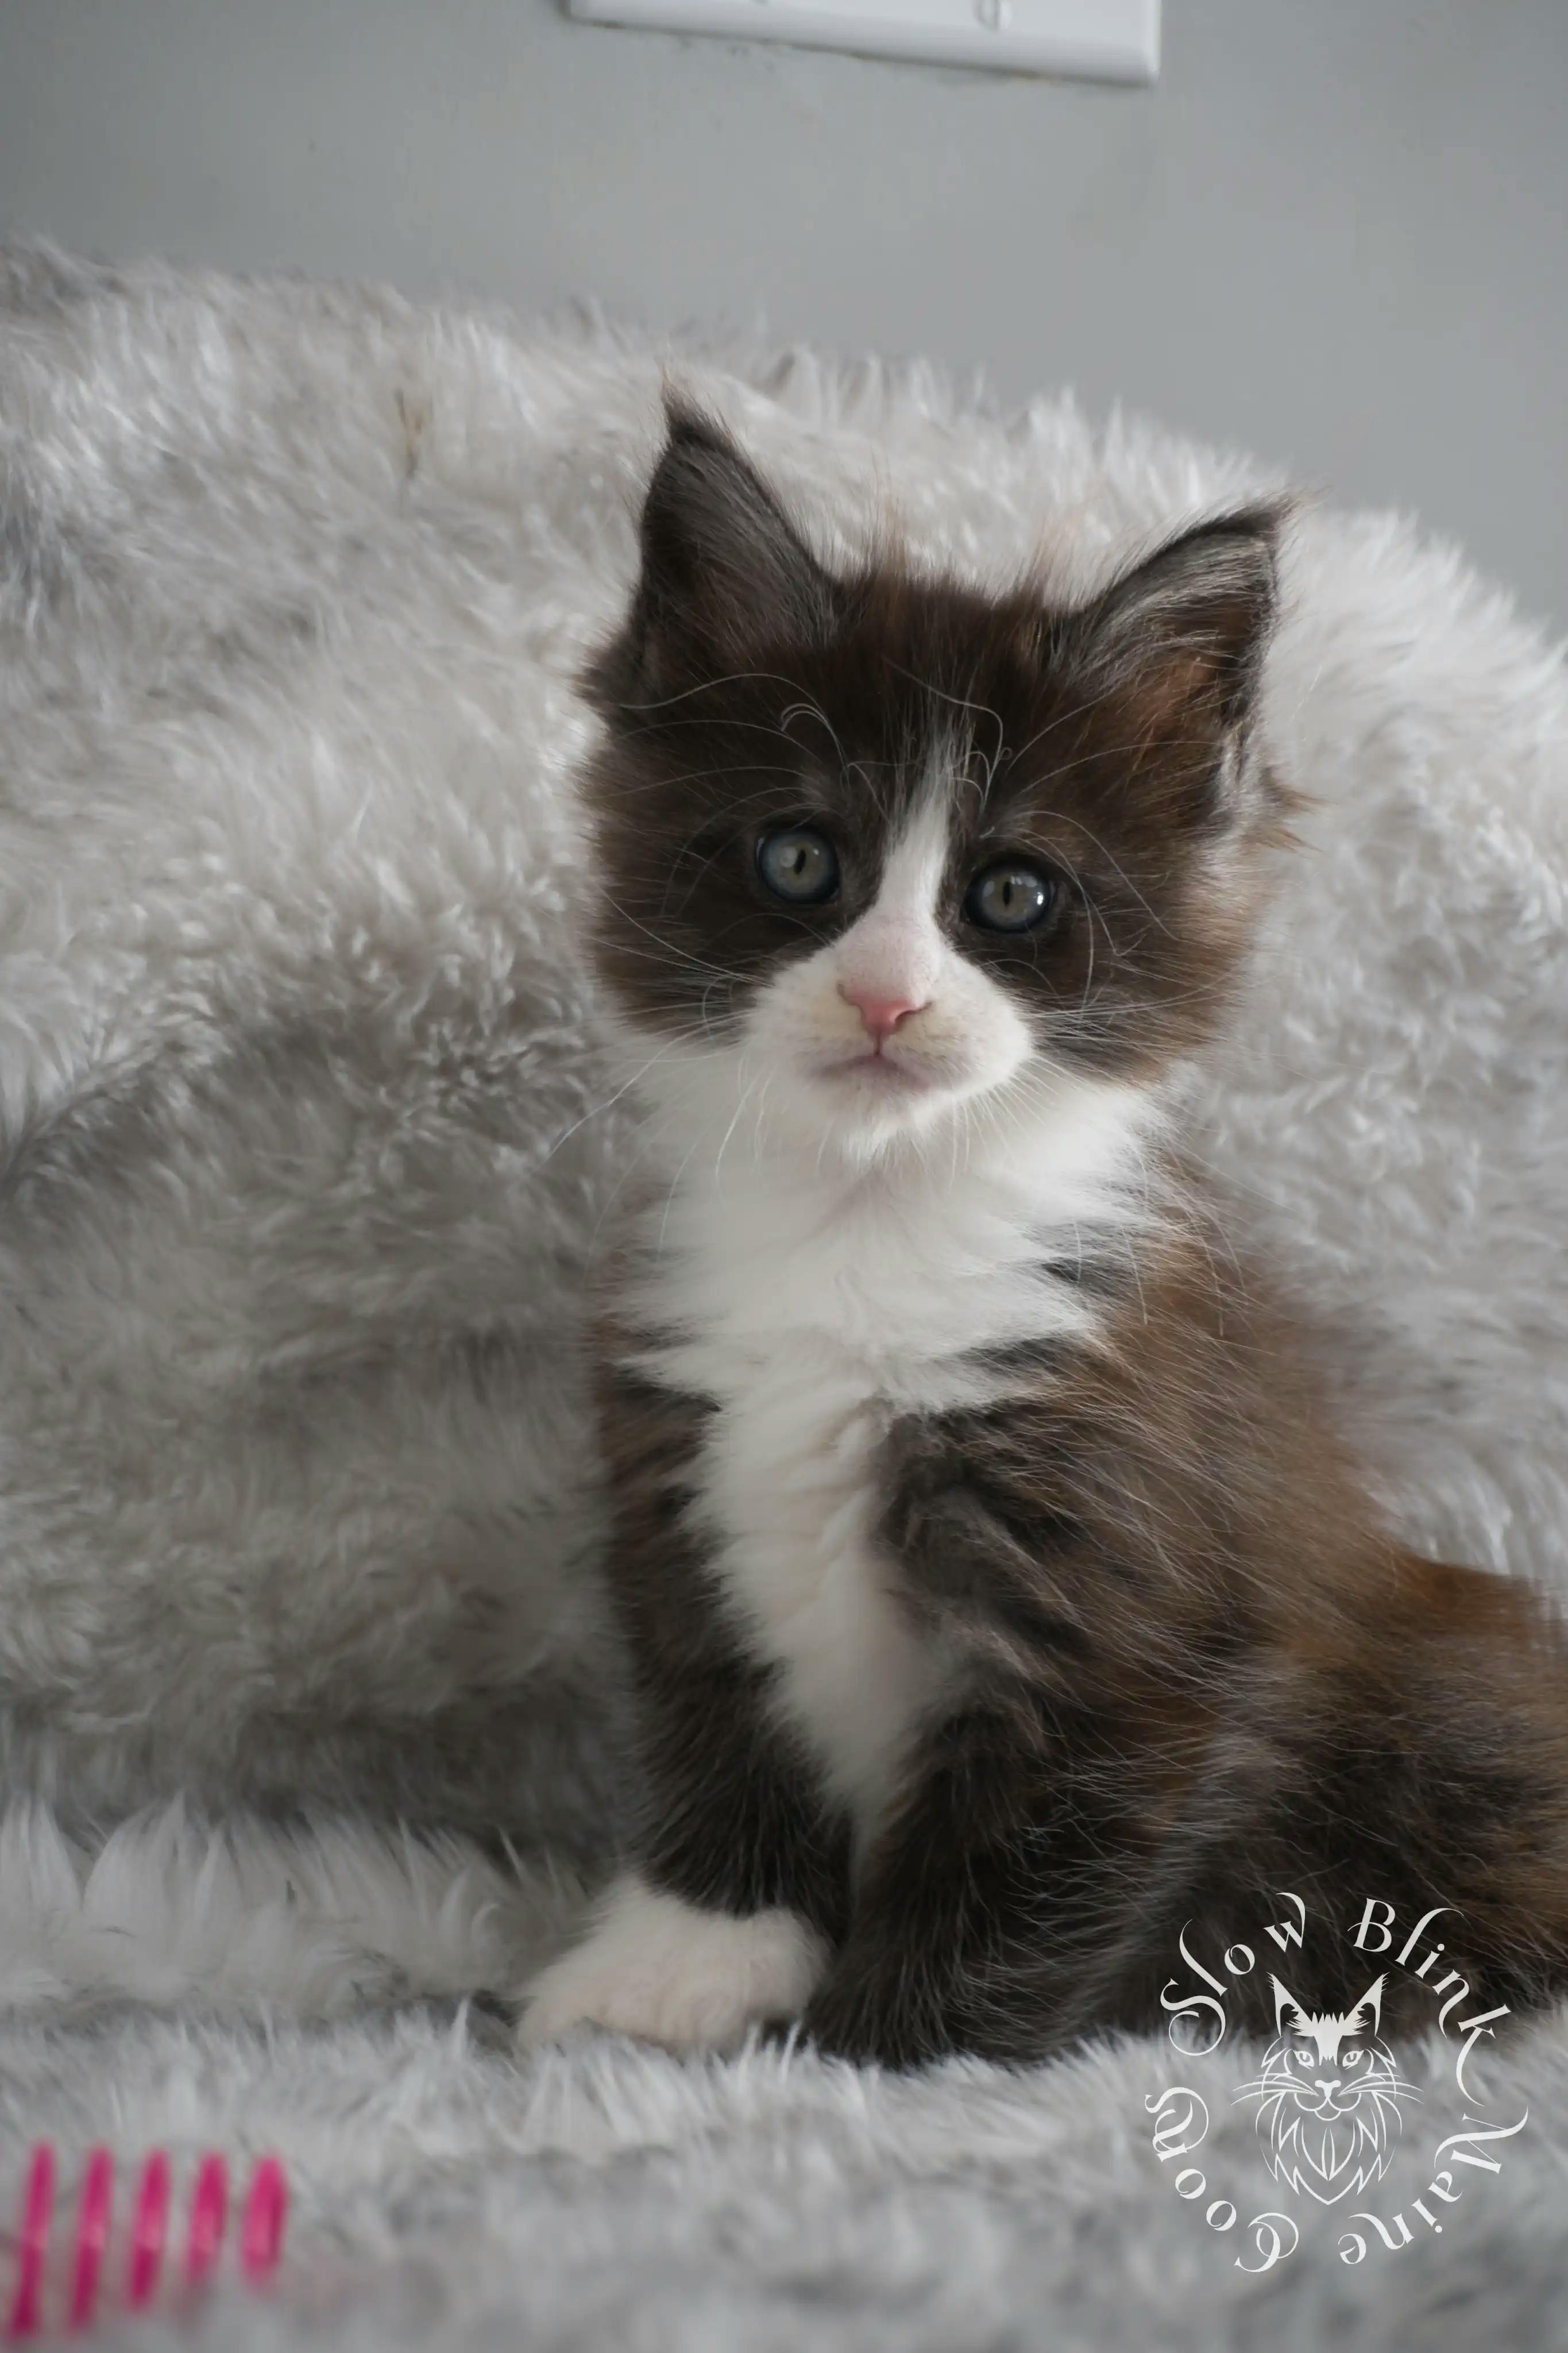 Bicolor Maine Coon Kittens > bicolor maine coon kitten | slowblinkmainecoons | ems code ns as 03 09 | 02 | 131